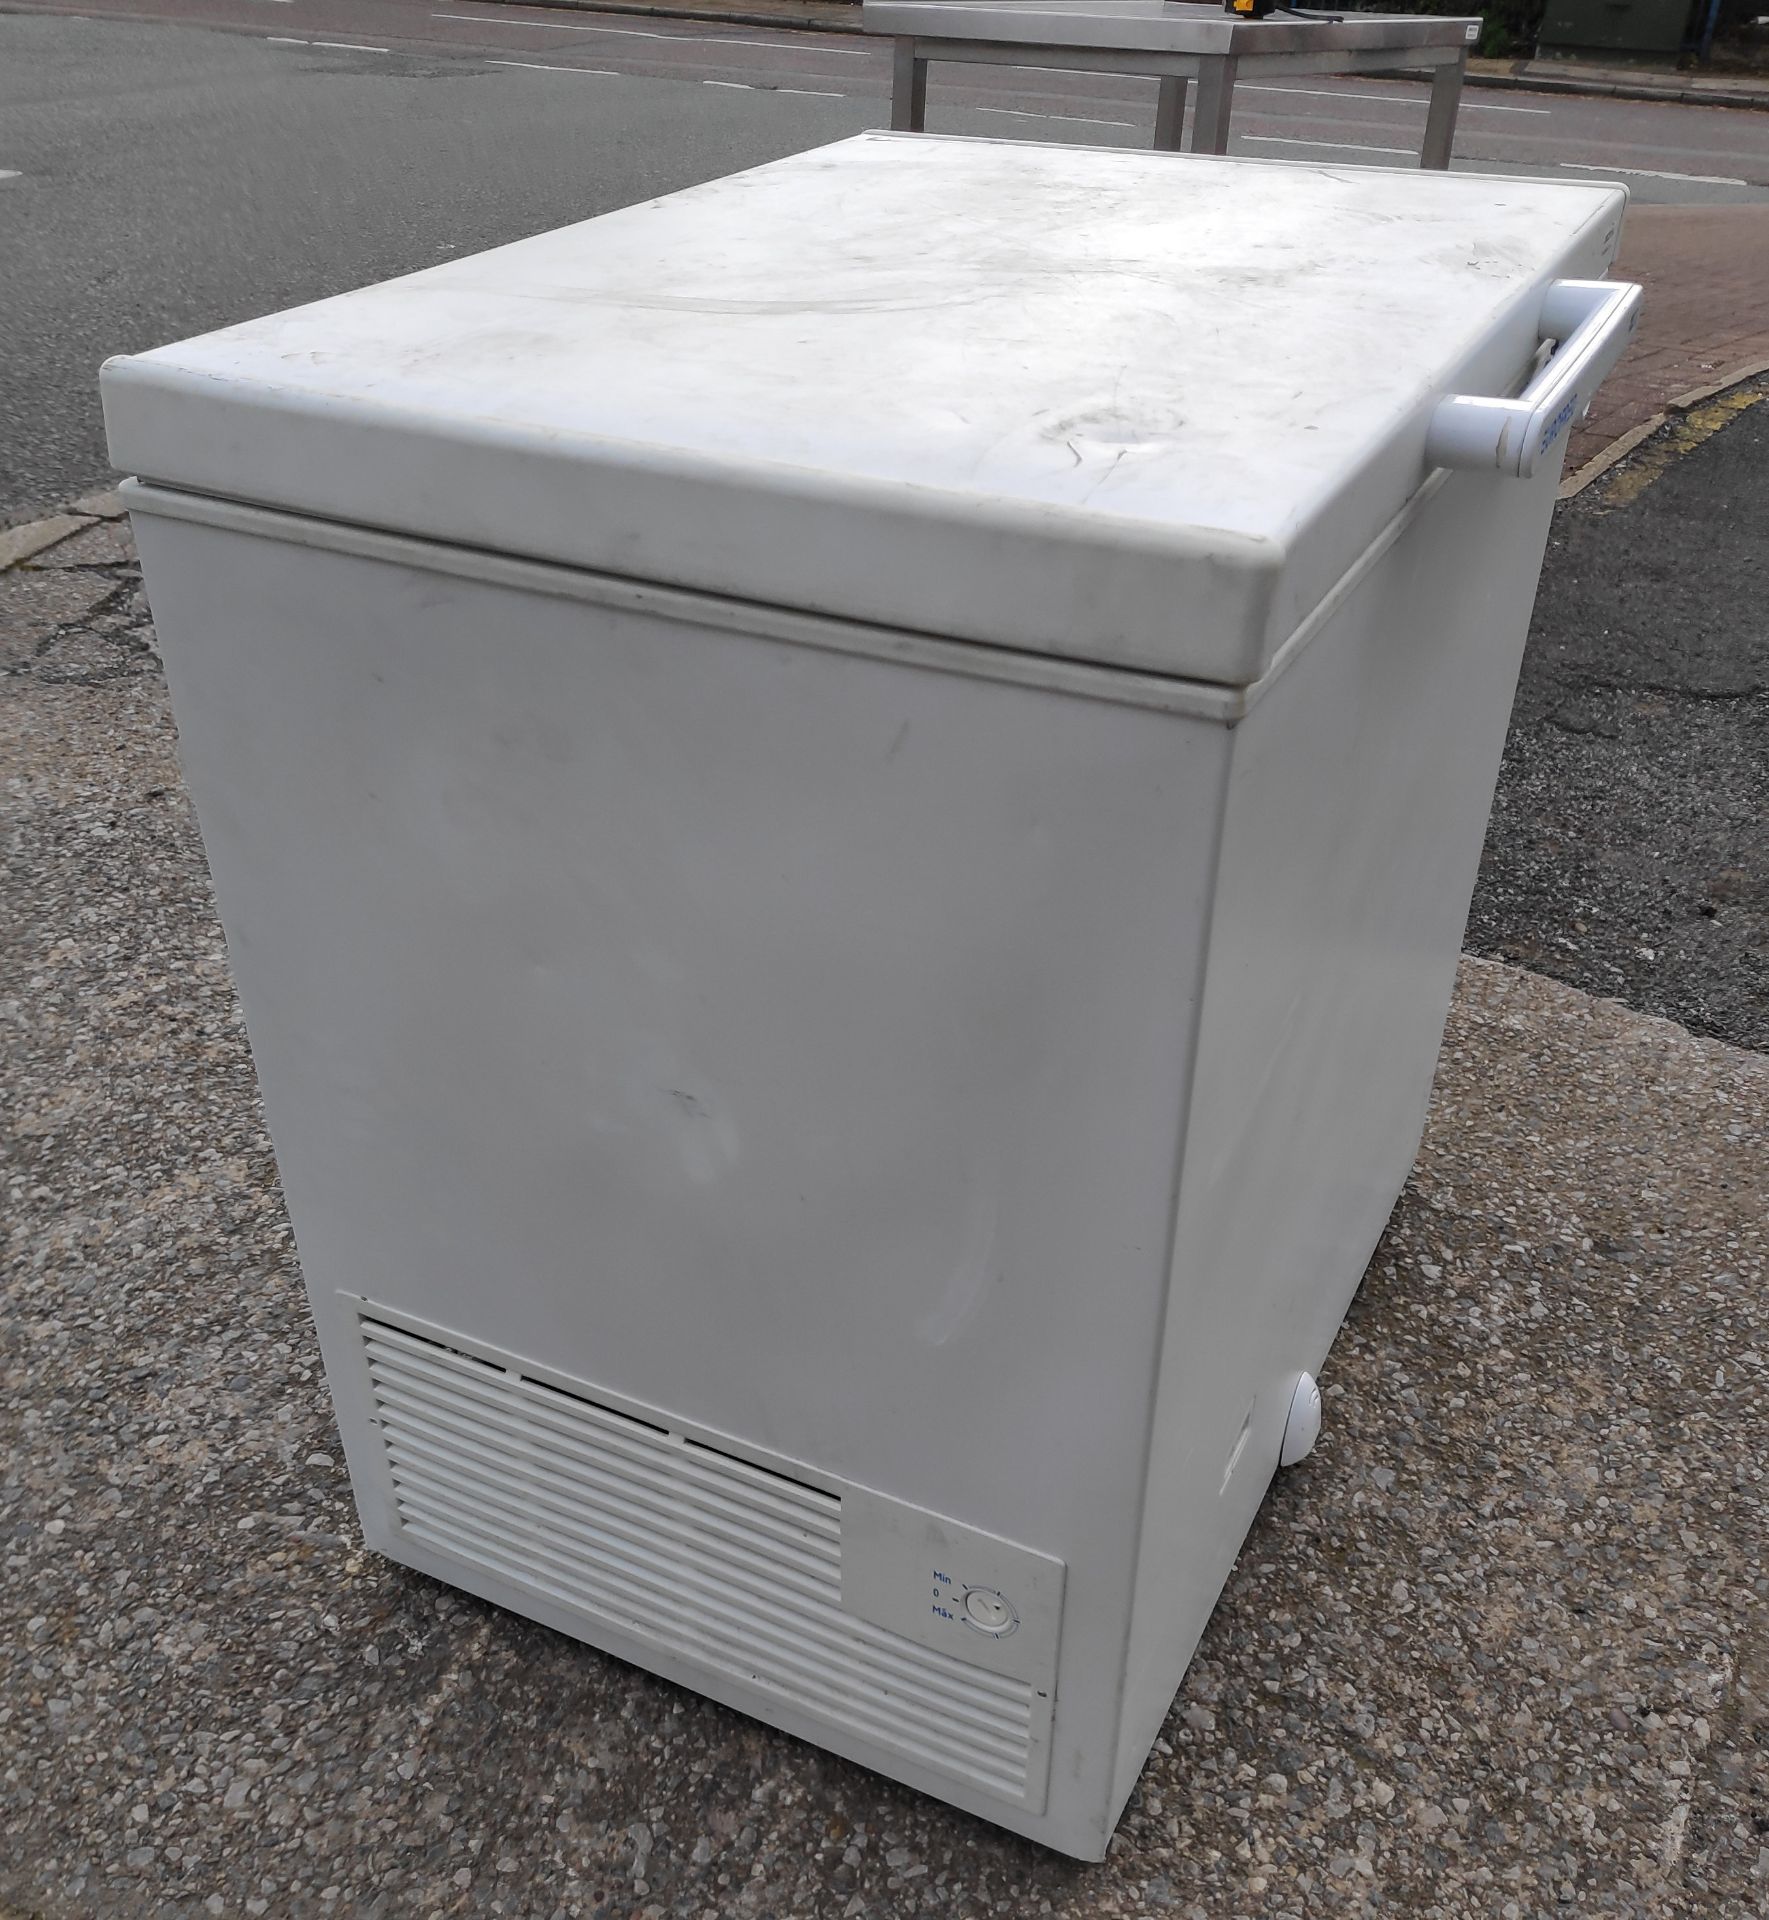 1 x Eurofred 208l Chest Freezer - Model HC240T - JMCS104 - CL723 - Location: Altrincham WA14Fitted - Image 3 of 13